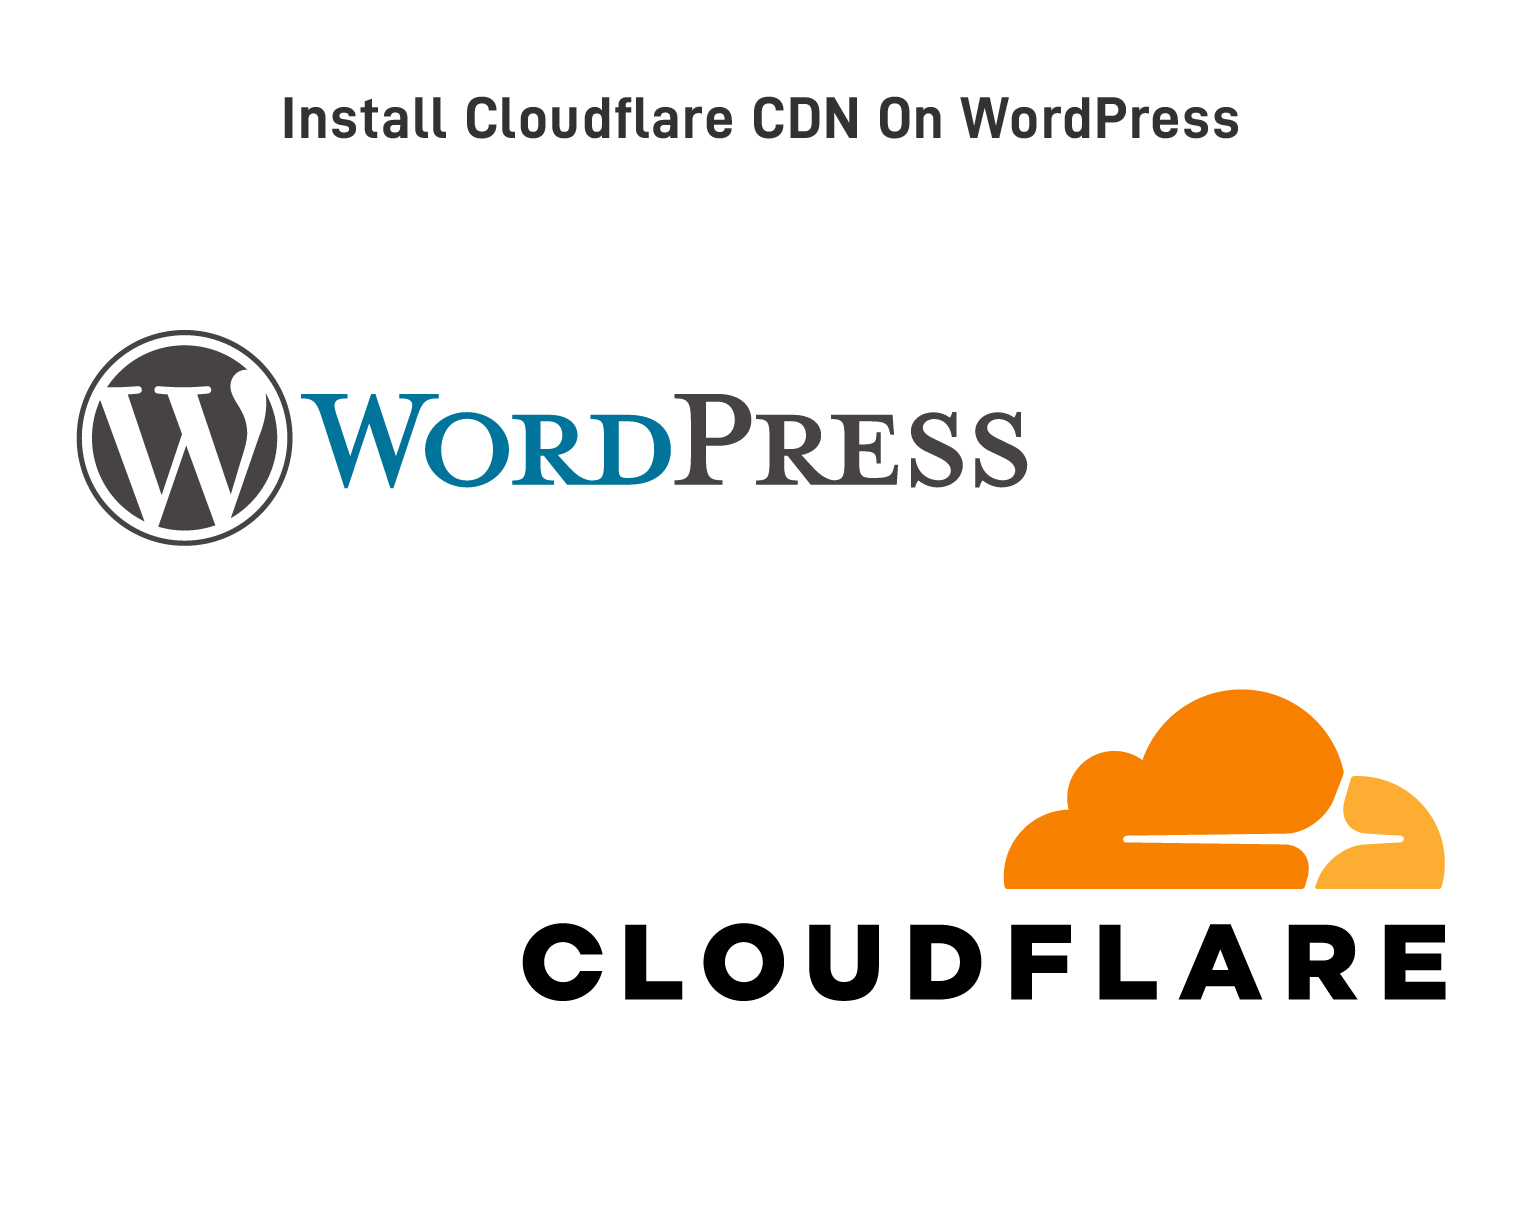 How to Install Cloudflare CDN on WordPress